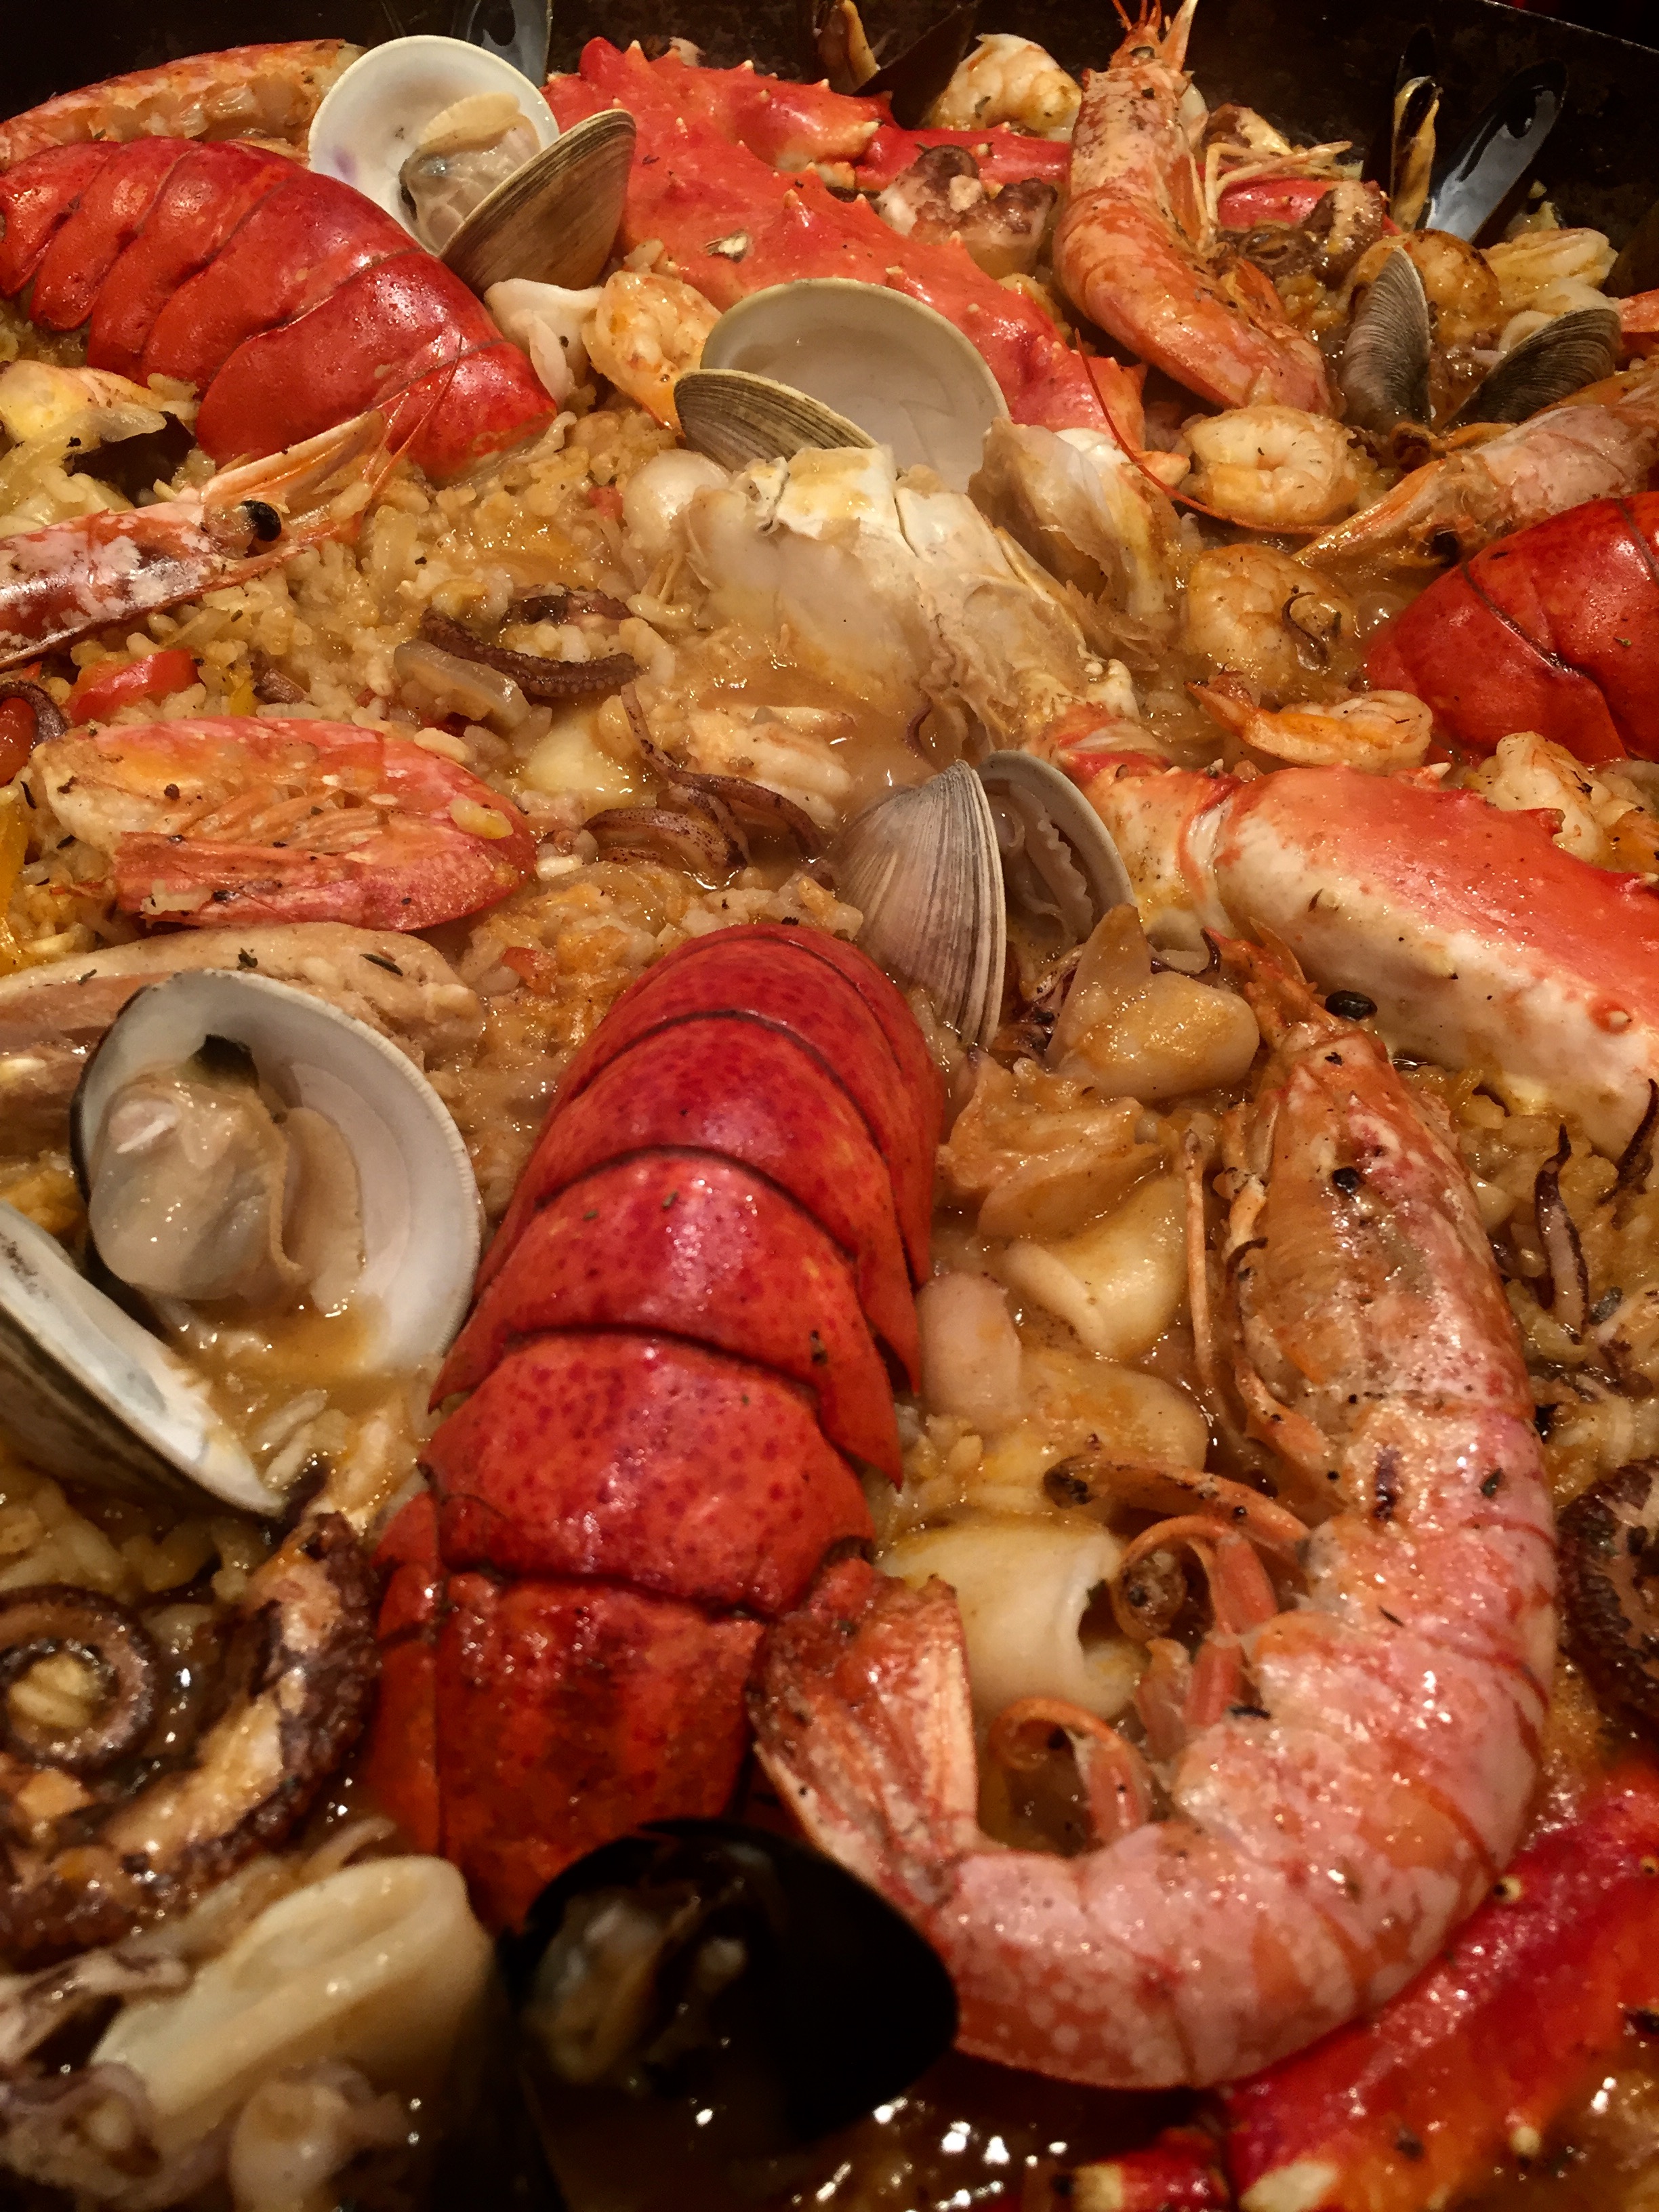 Rabbit and Seafood Paella - The Kitchen Thief